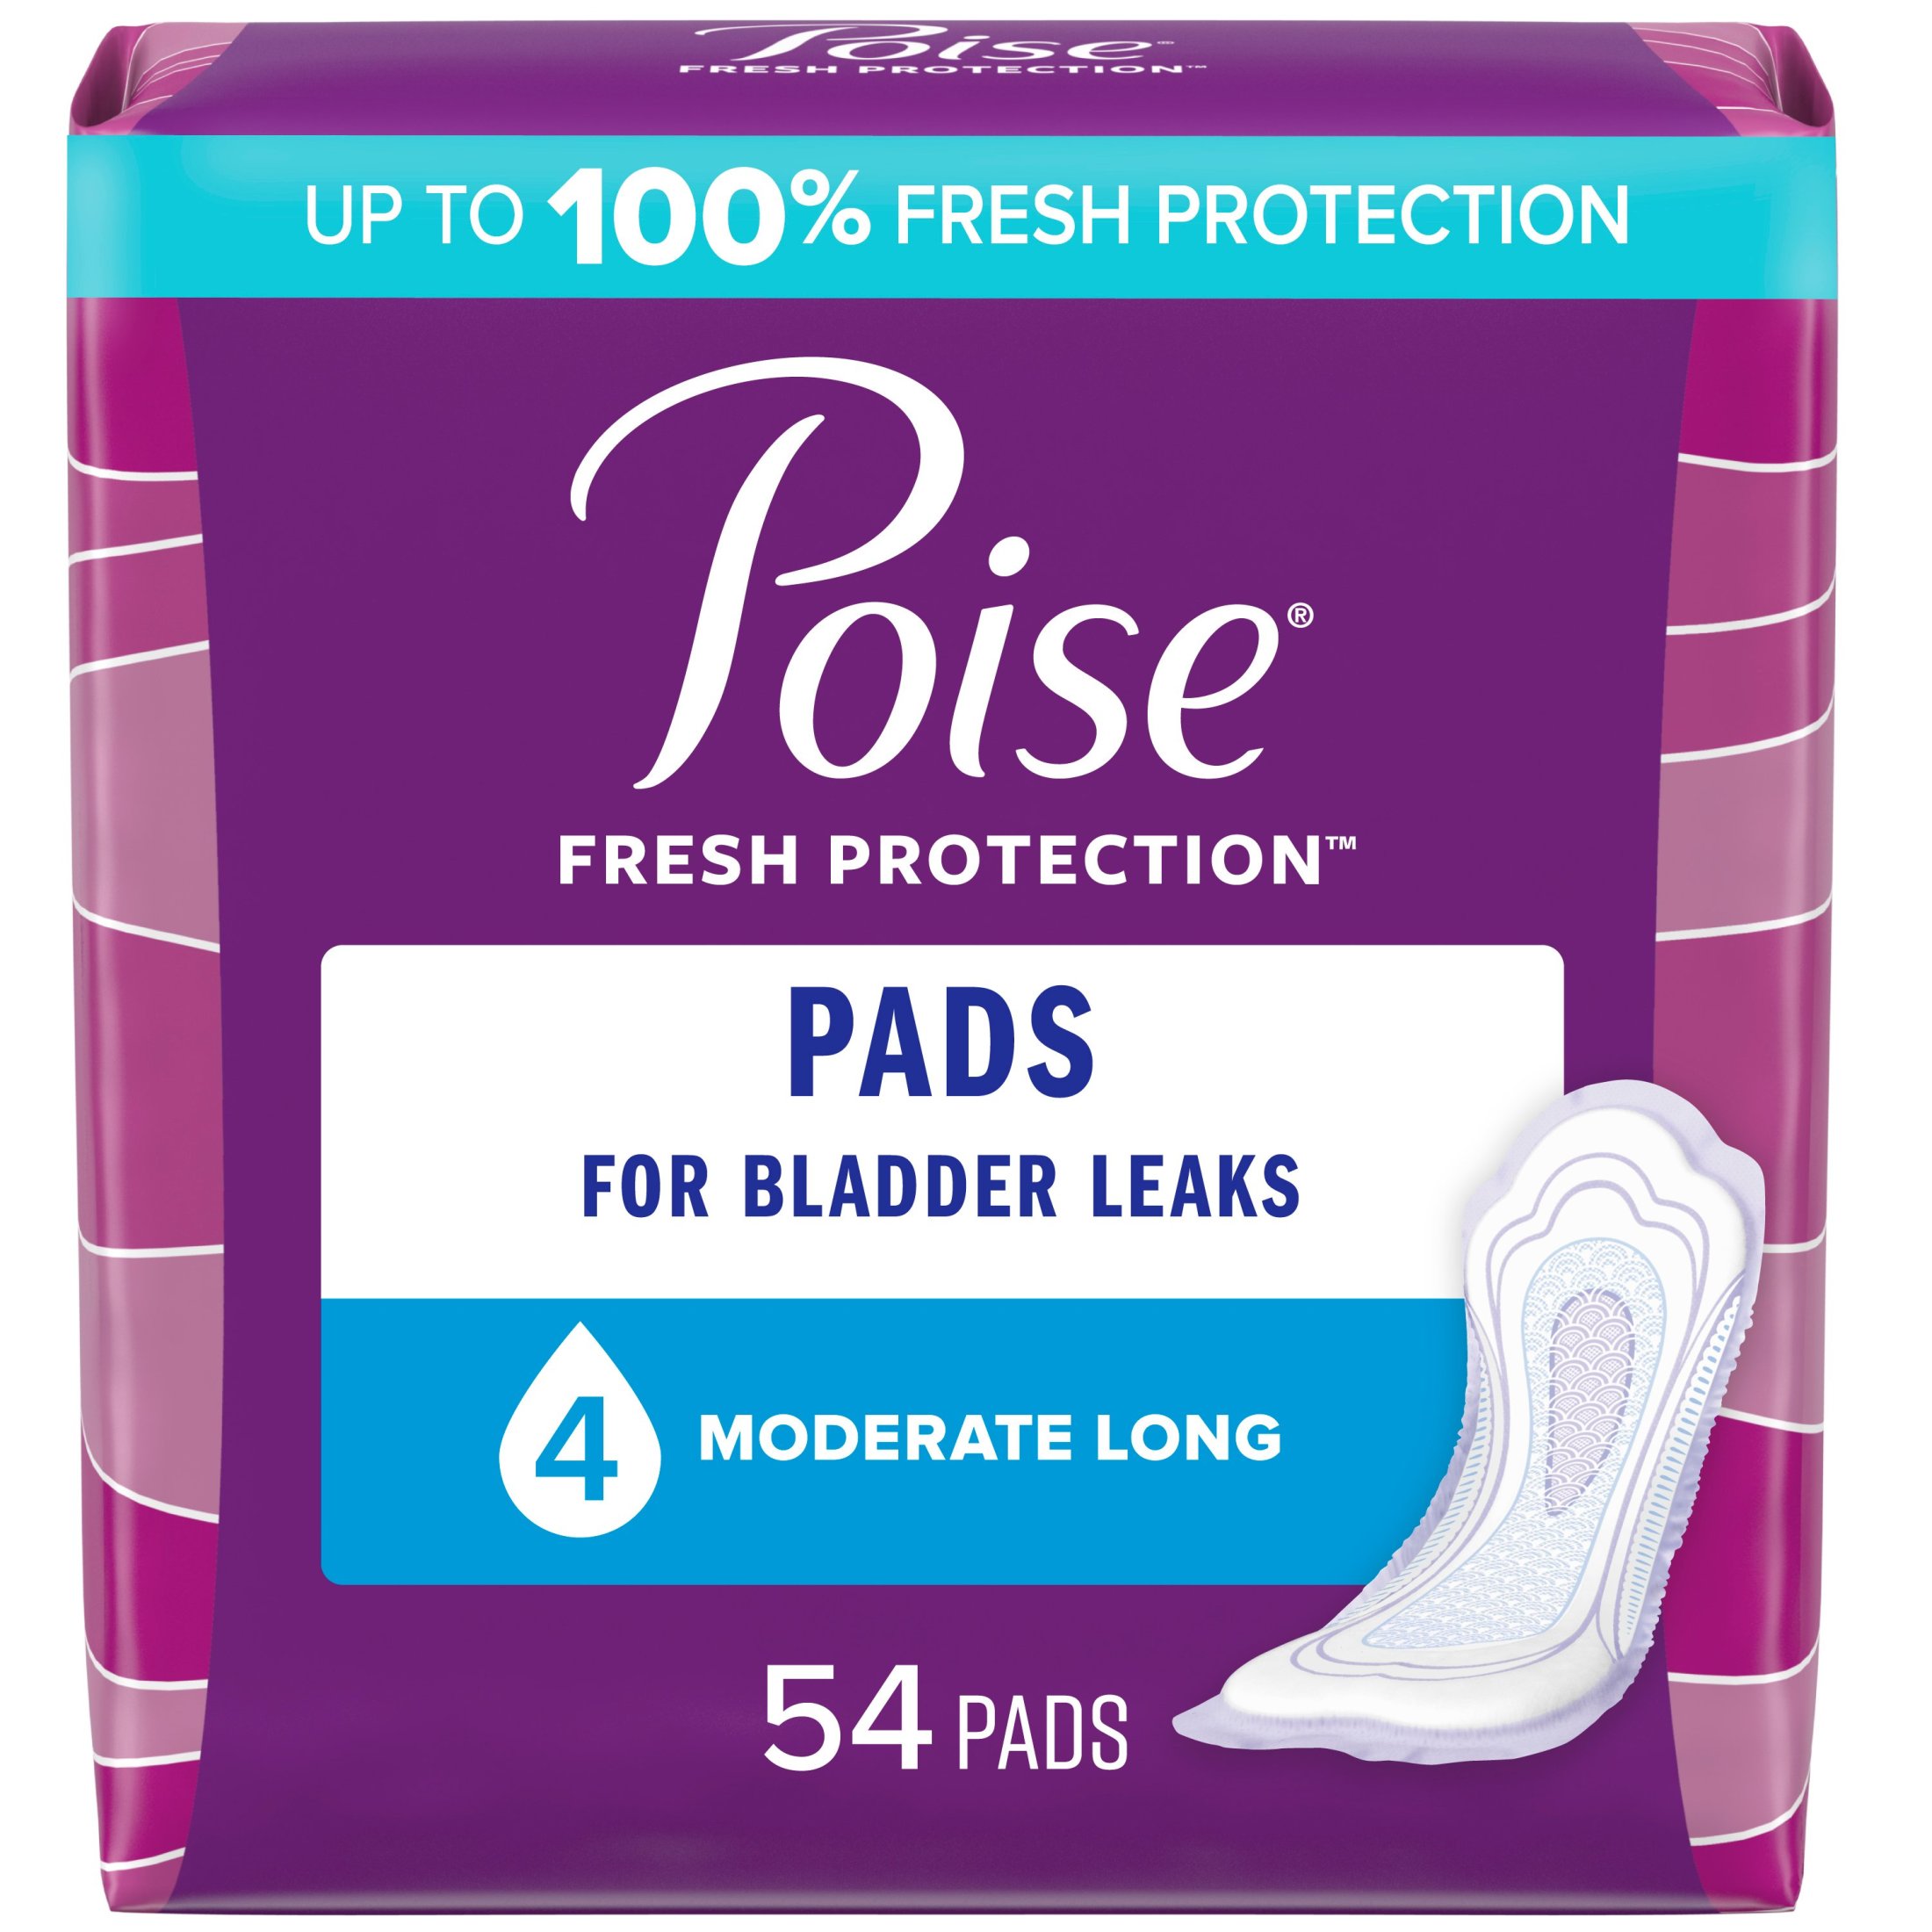 Poise Incontinence Pads for Women, 4 Drop, Moderate Absorbency, Long, 54Ct - image 1 of 8